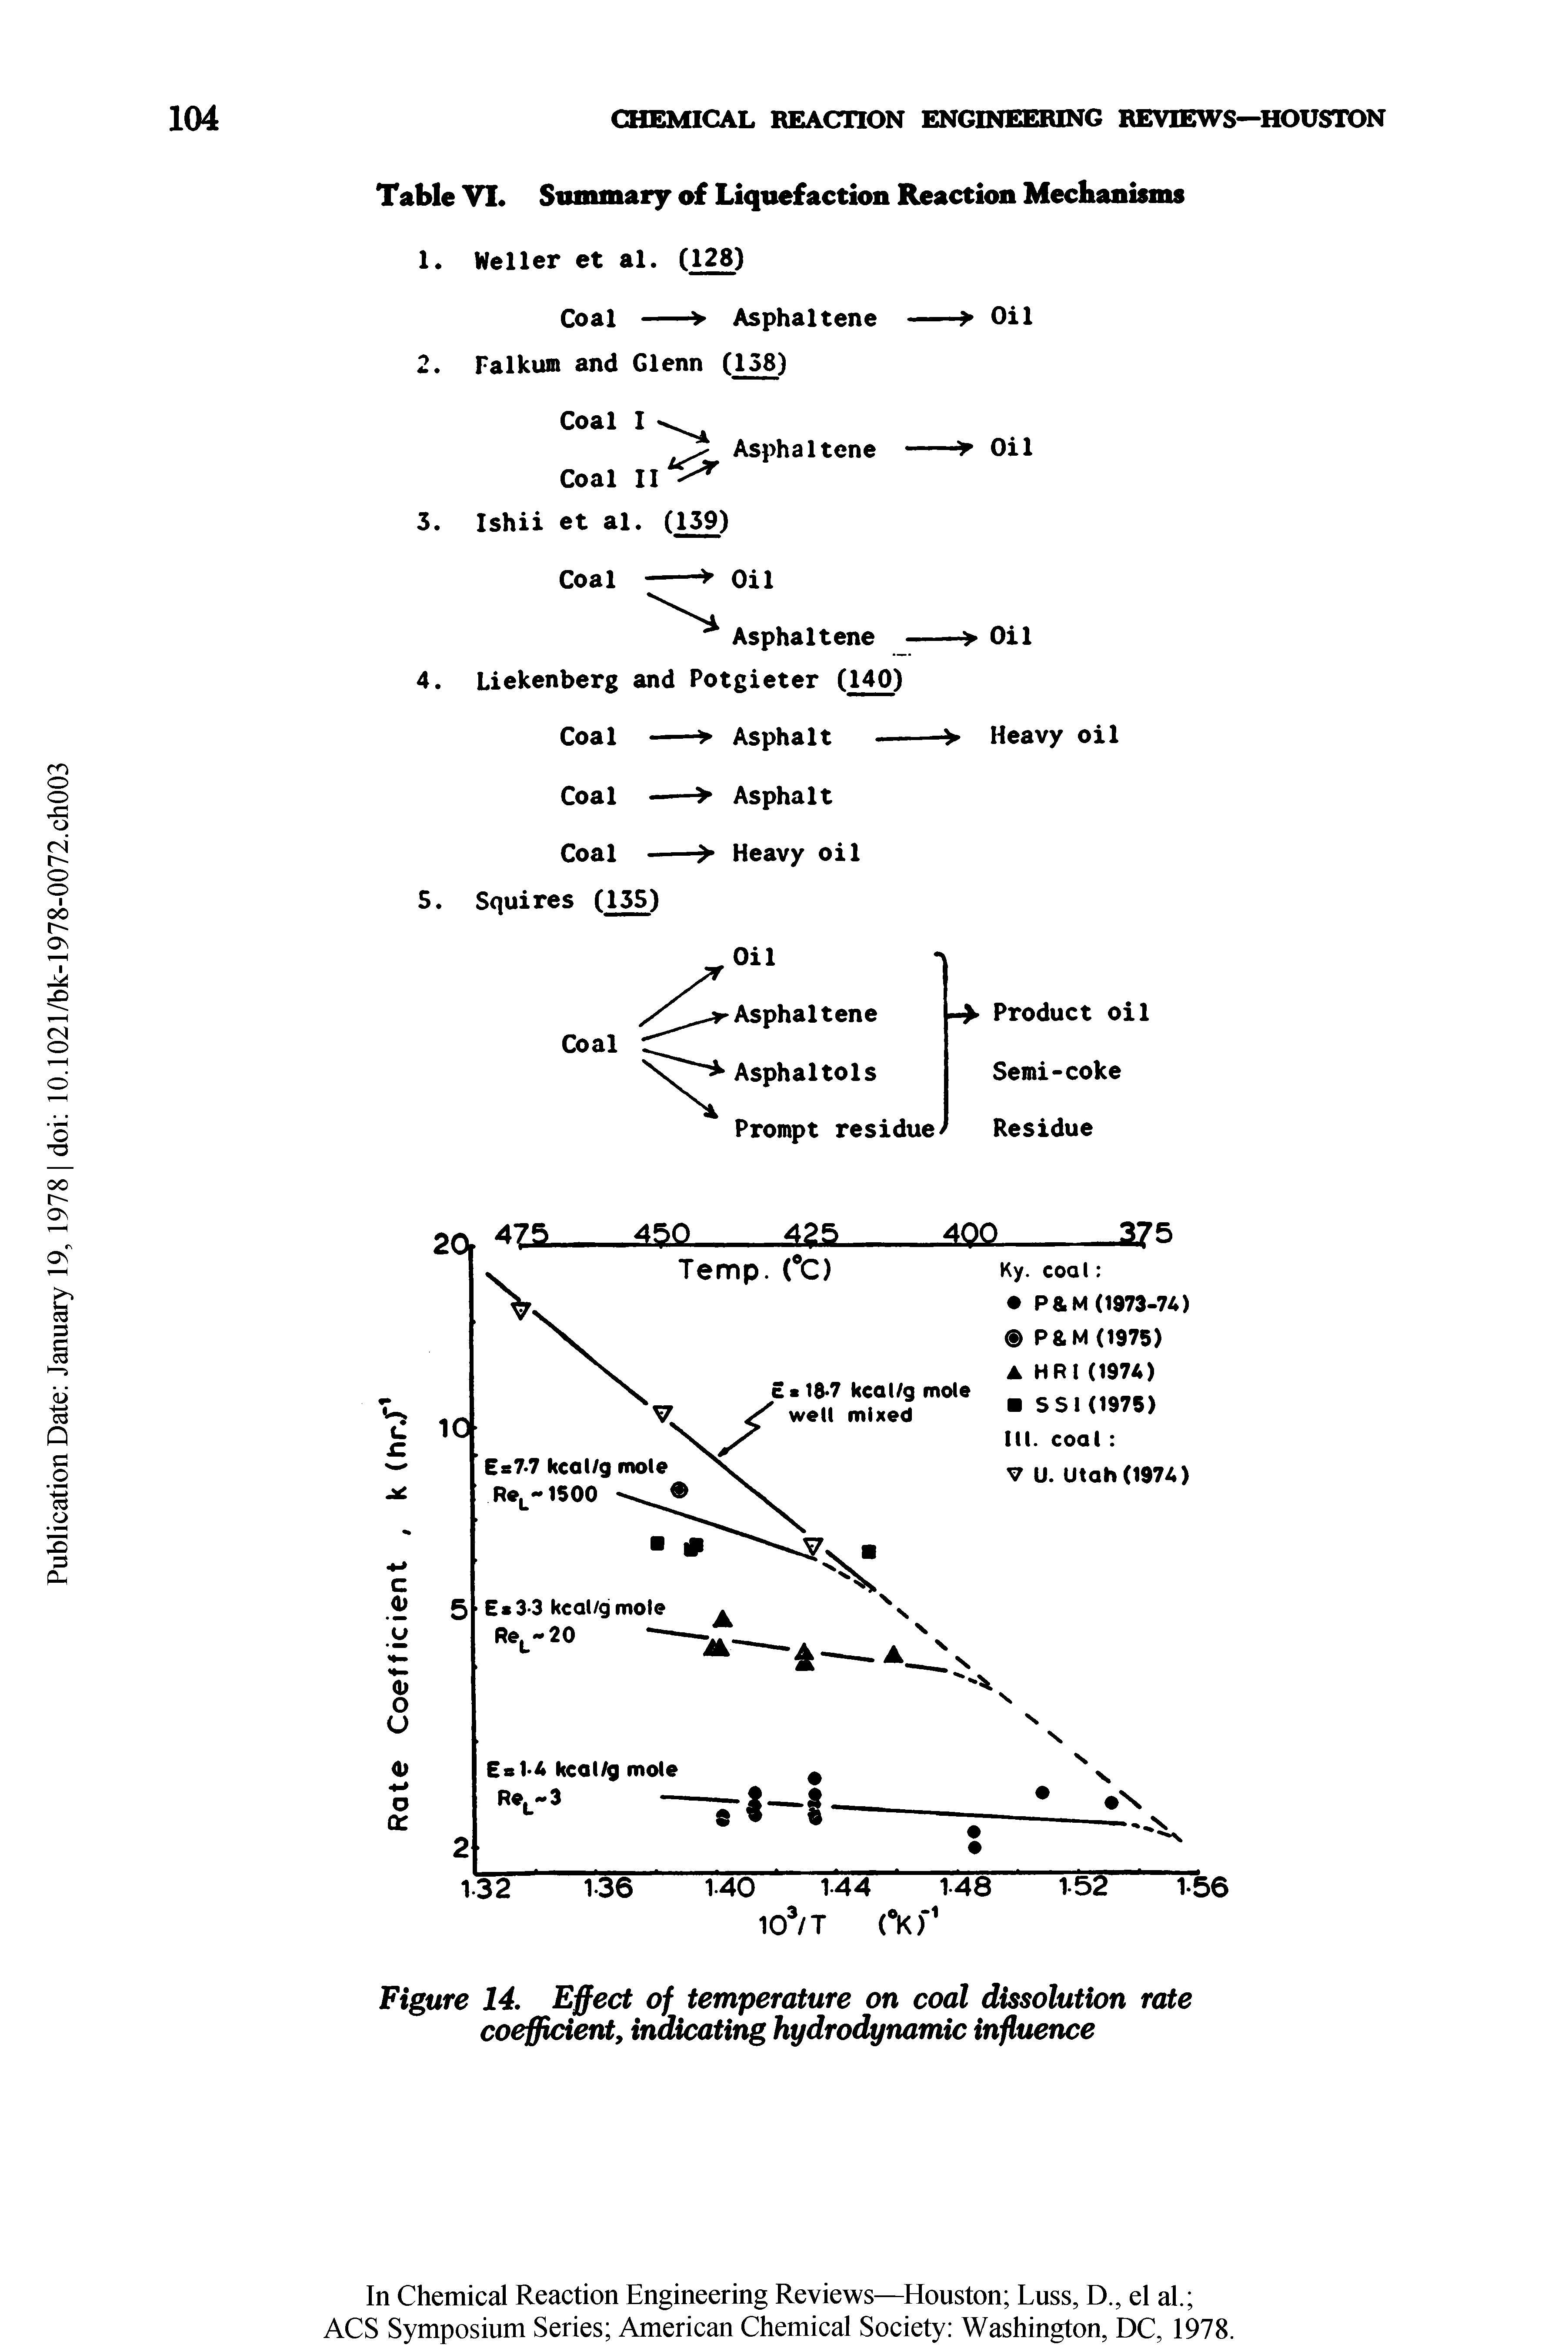 Figure 14. Effect of temperature on coal dissolution rate coefficient, indicating hydrodynamic influence...